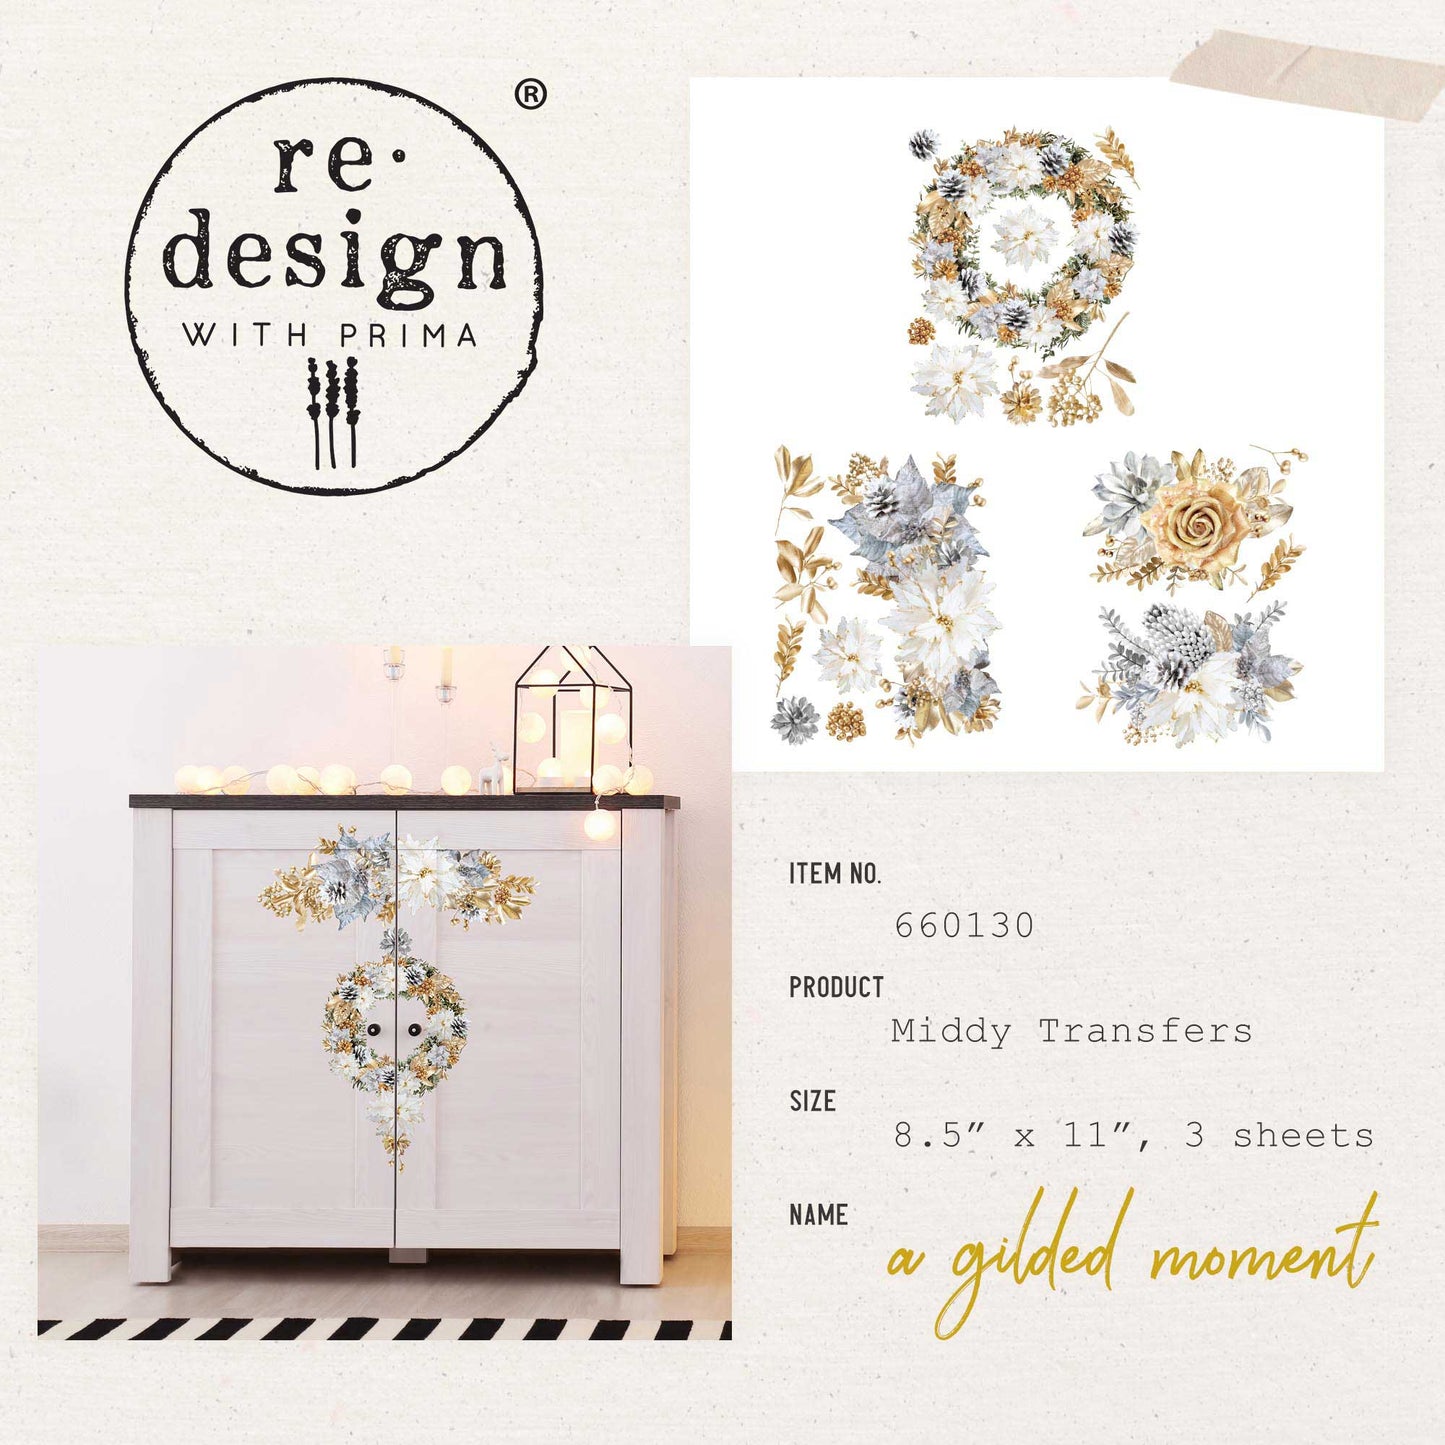 A Gilded Moment - Middy Transfer - Redesign with Prima